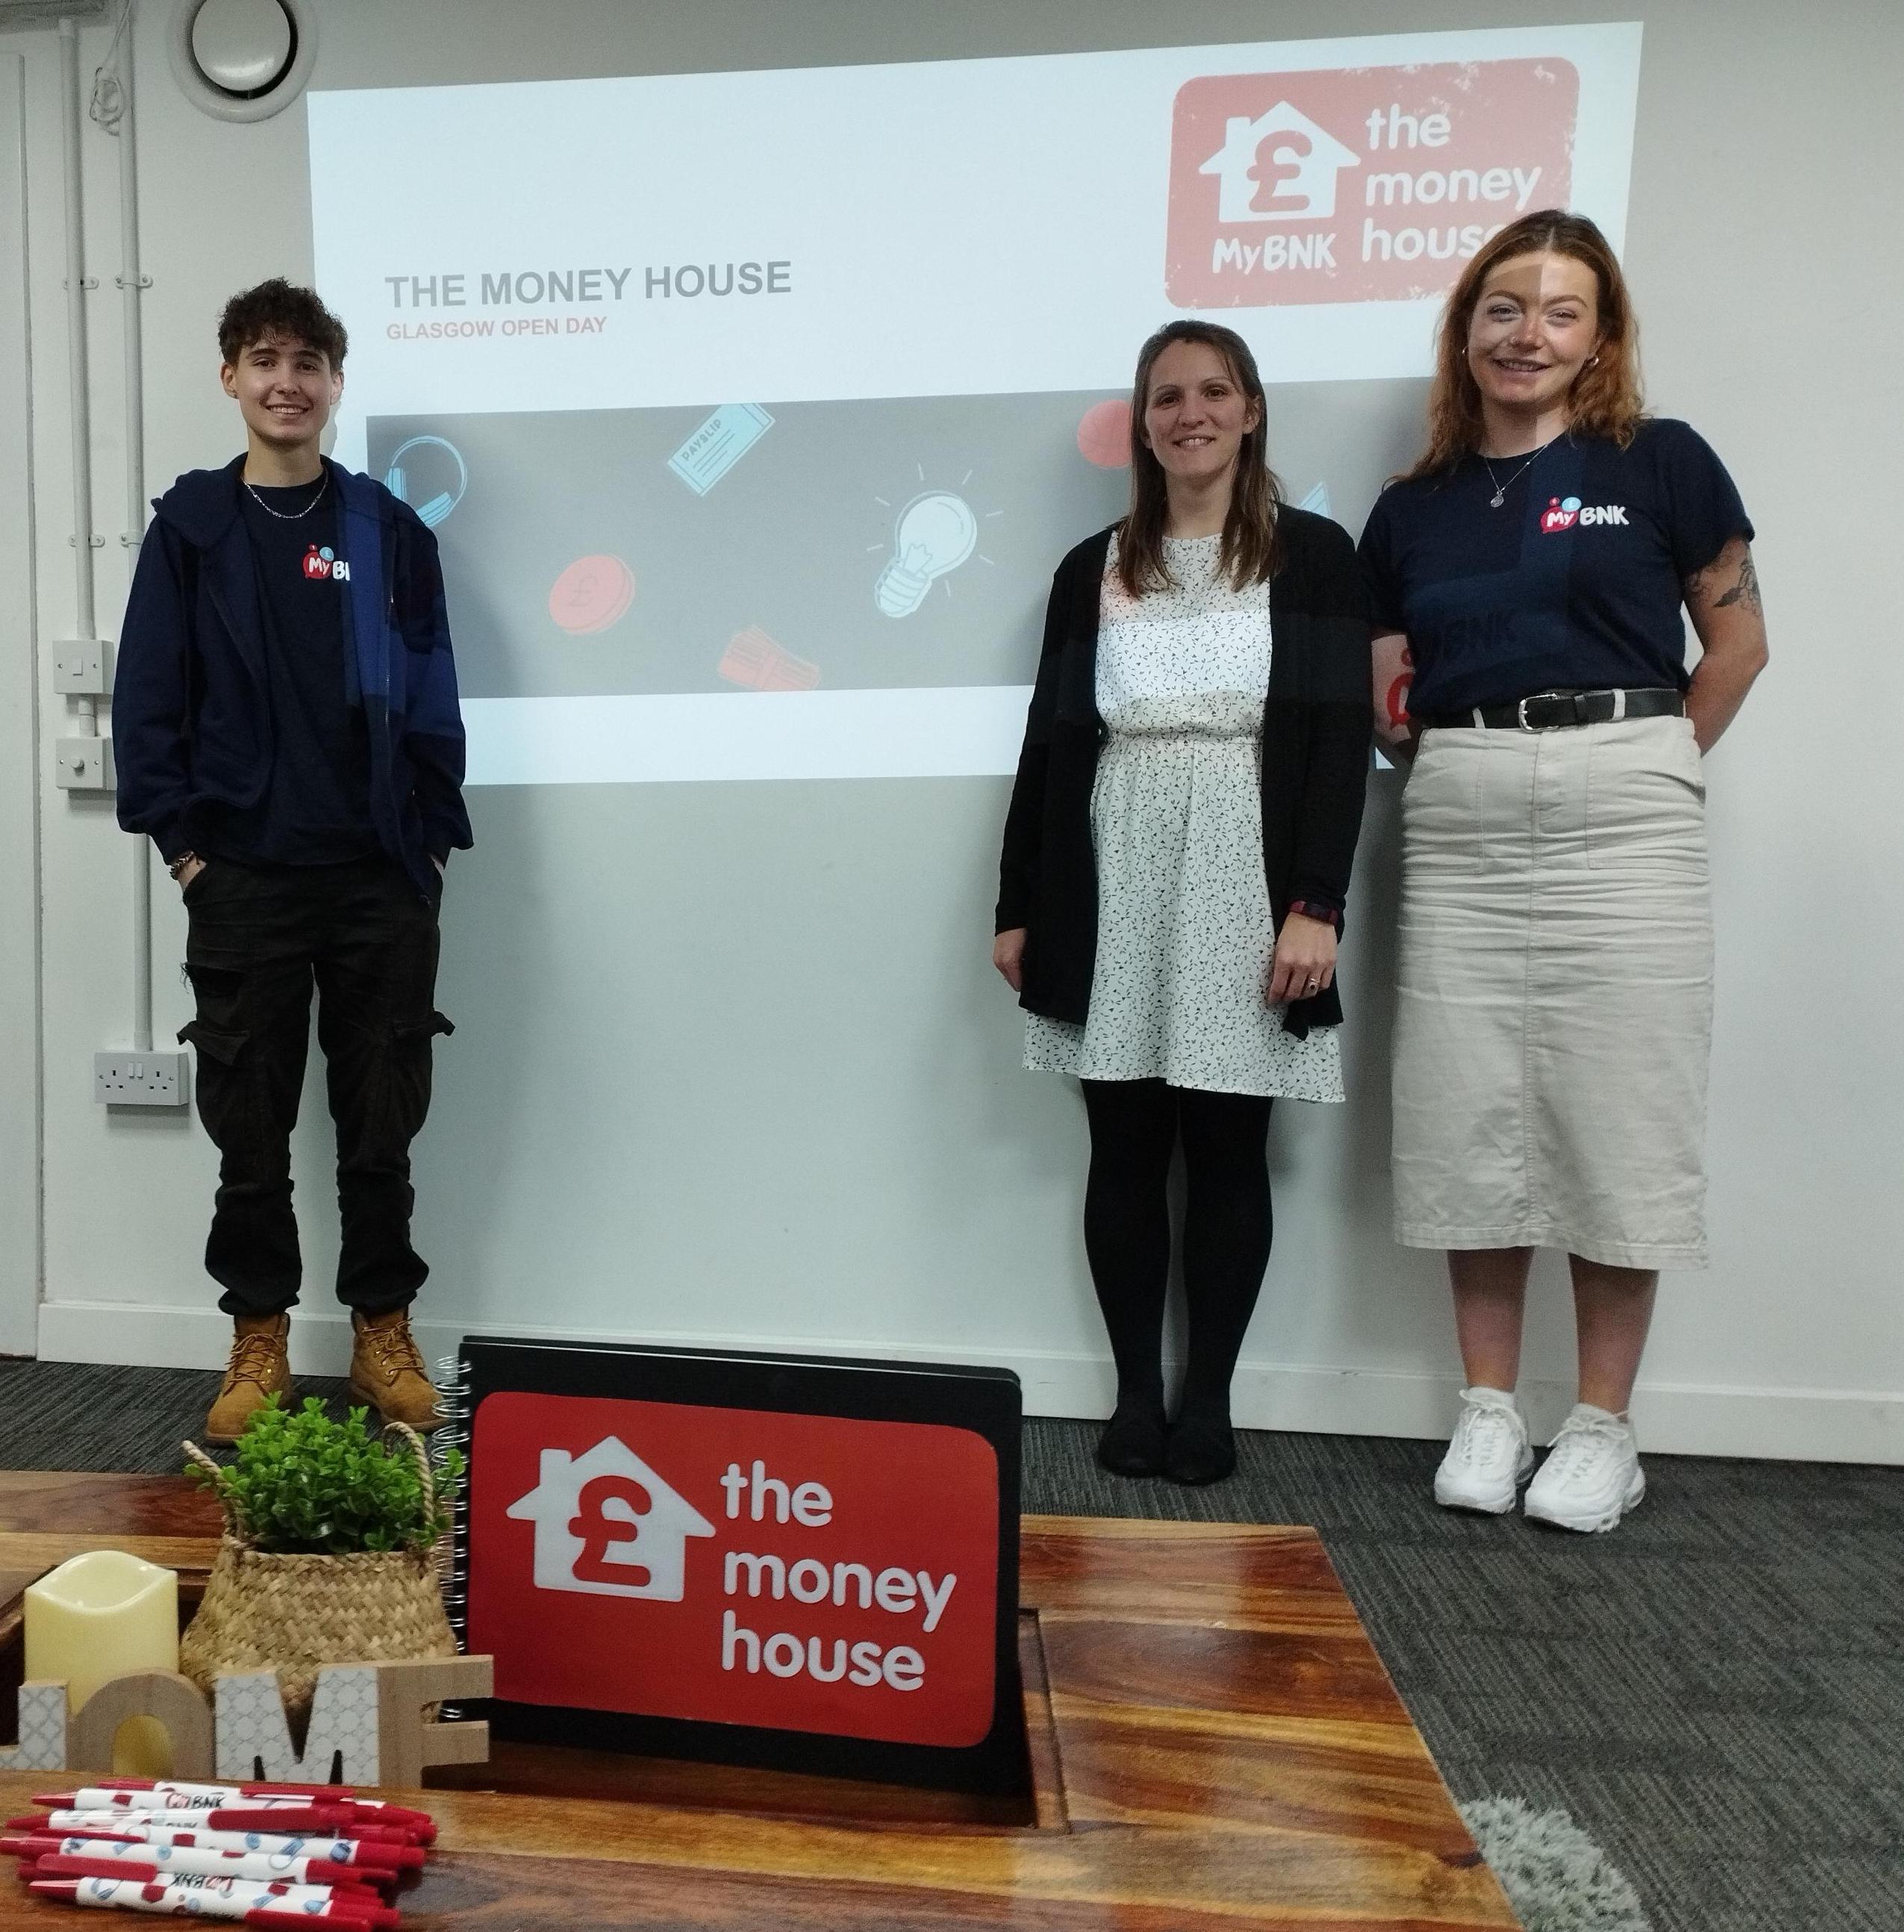 Three young people stand in front ion a projector screen which shows 'The Money House logo and the words The Money House Glasgow Open Day. At the foreground is a wooden table with a plant, wooden lettering spelling out 'Home', and Money House branded material such as pens.